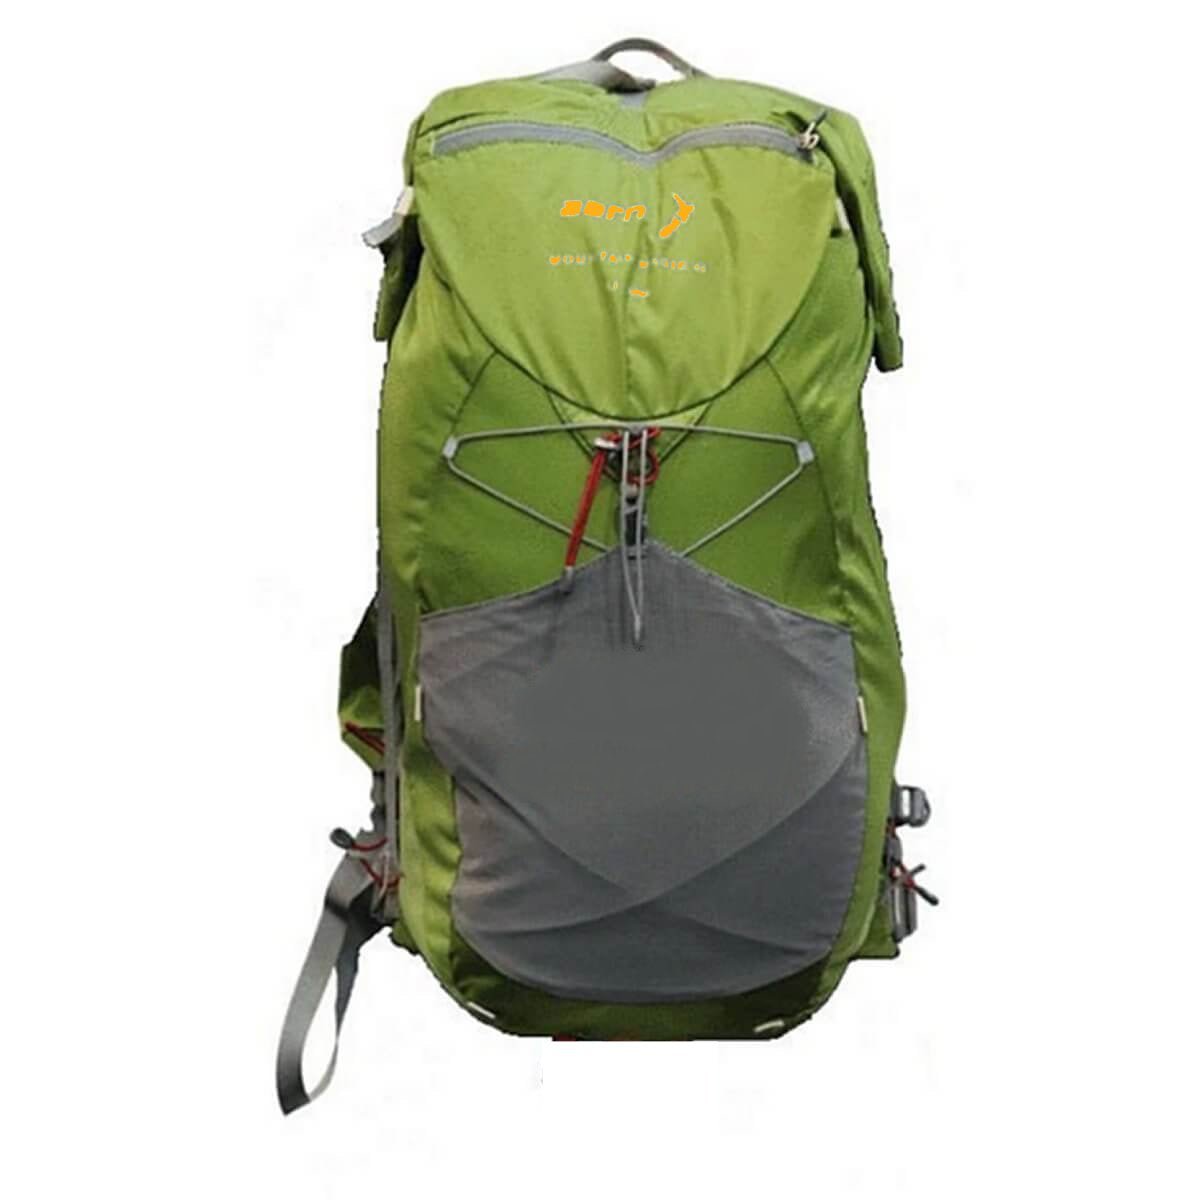 Goodluck 10 L Hiking Bag - Buy Goodluck 10 L Hiking Bag Online at Low Price  - Snapdeal